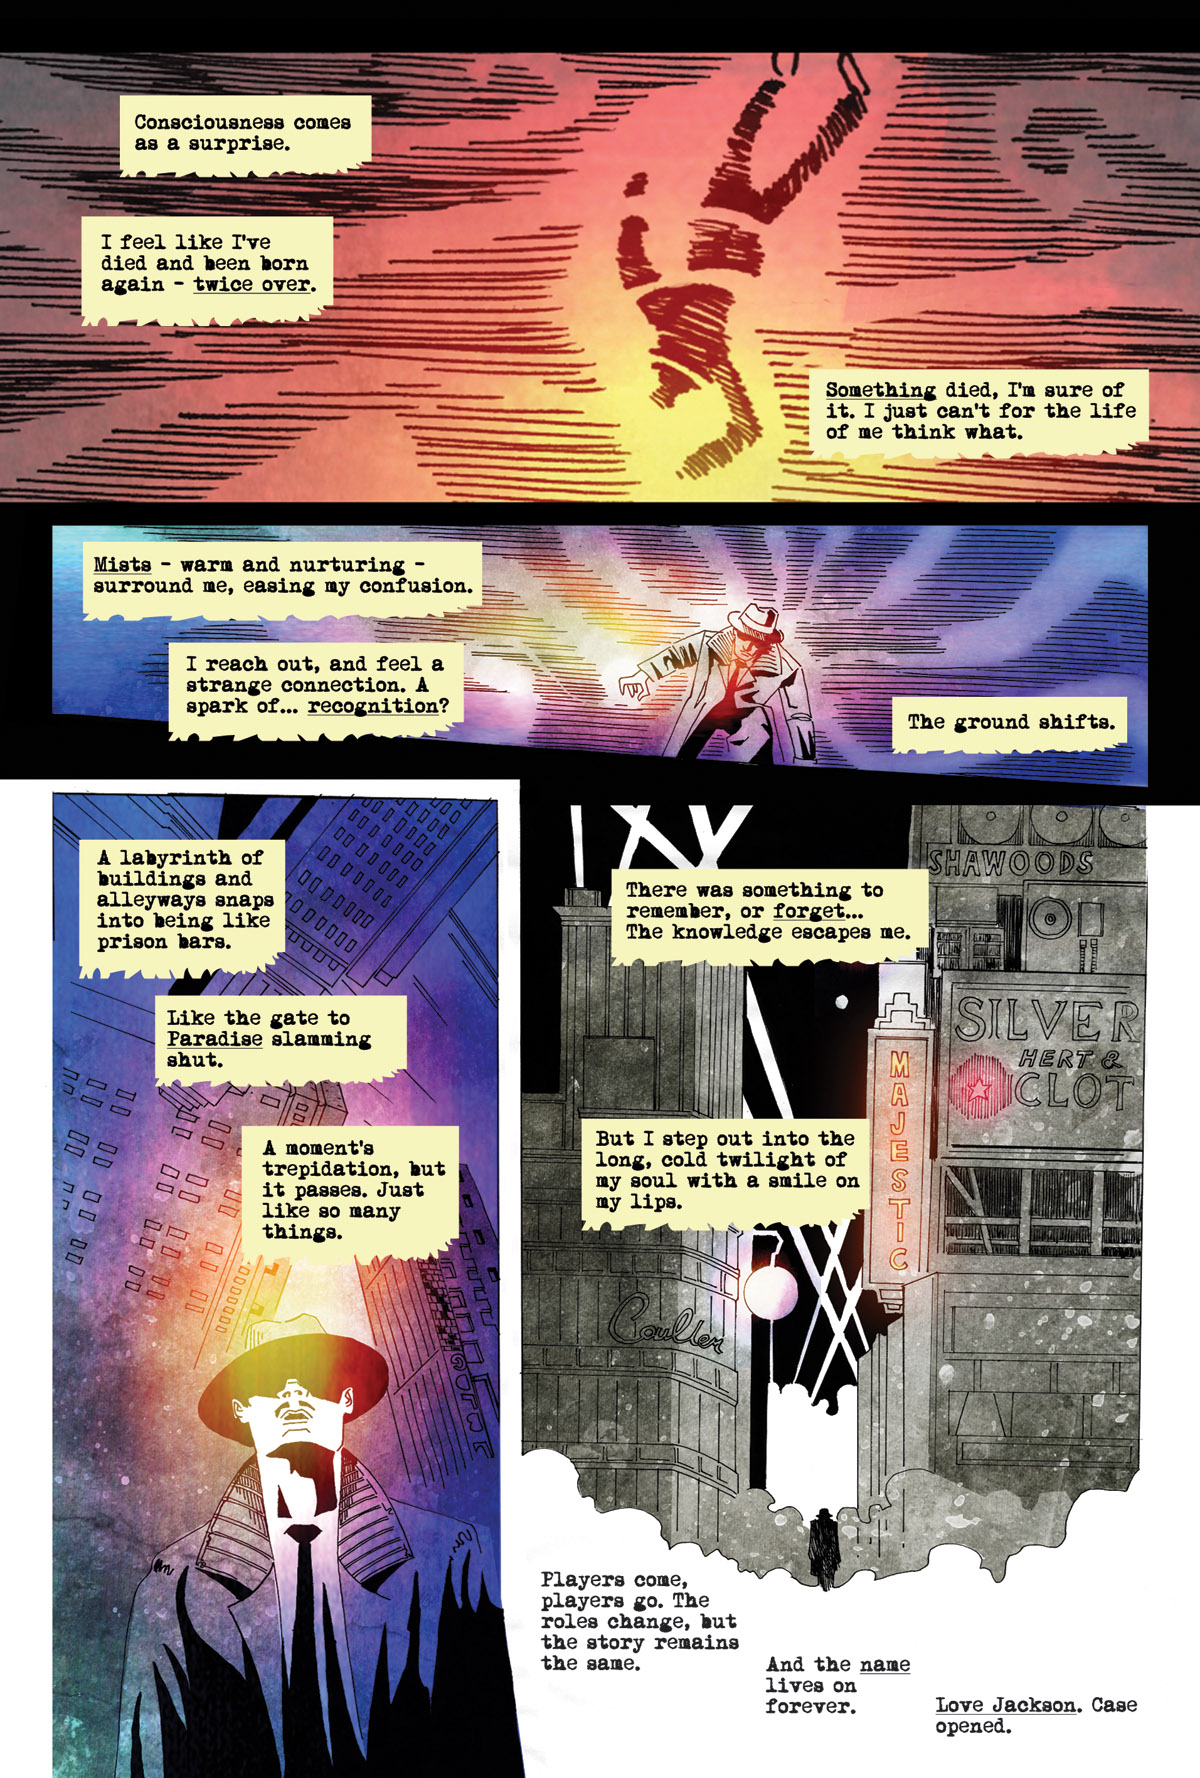 Afterlife Inc. | Silver Screen | Page 8